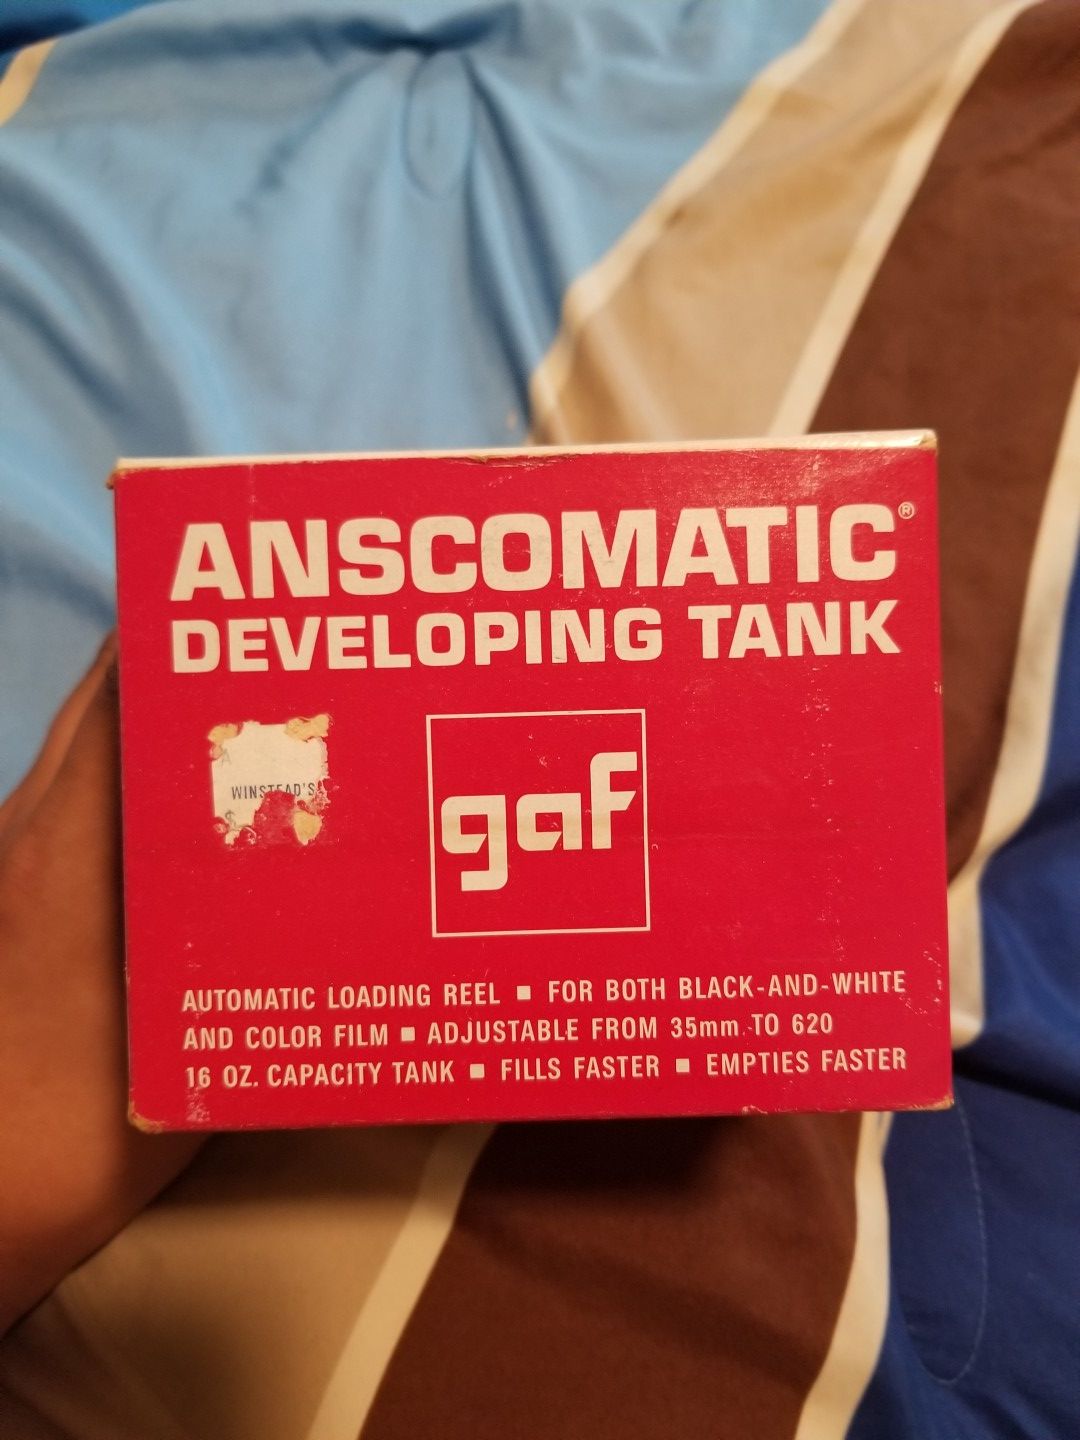 GAF ANSCOMATIC DEVELOPING TANK